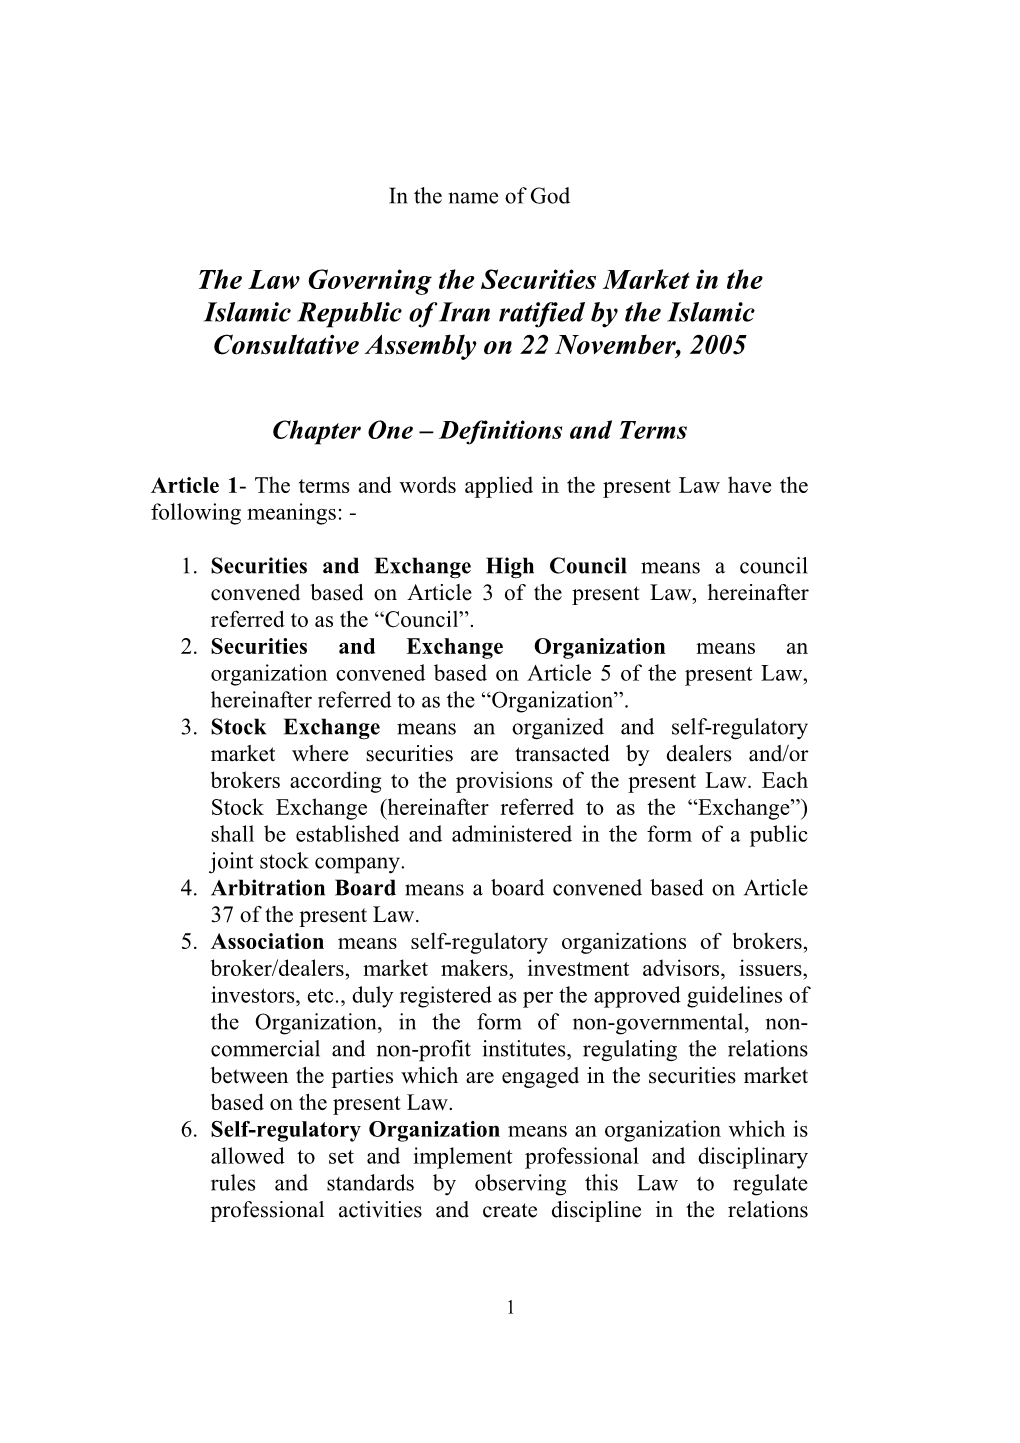 The Law Governing the Securities Market in the Islamic Republic of Iran Ratified by the Islamic Consultative Assembly on 22 November, 2005